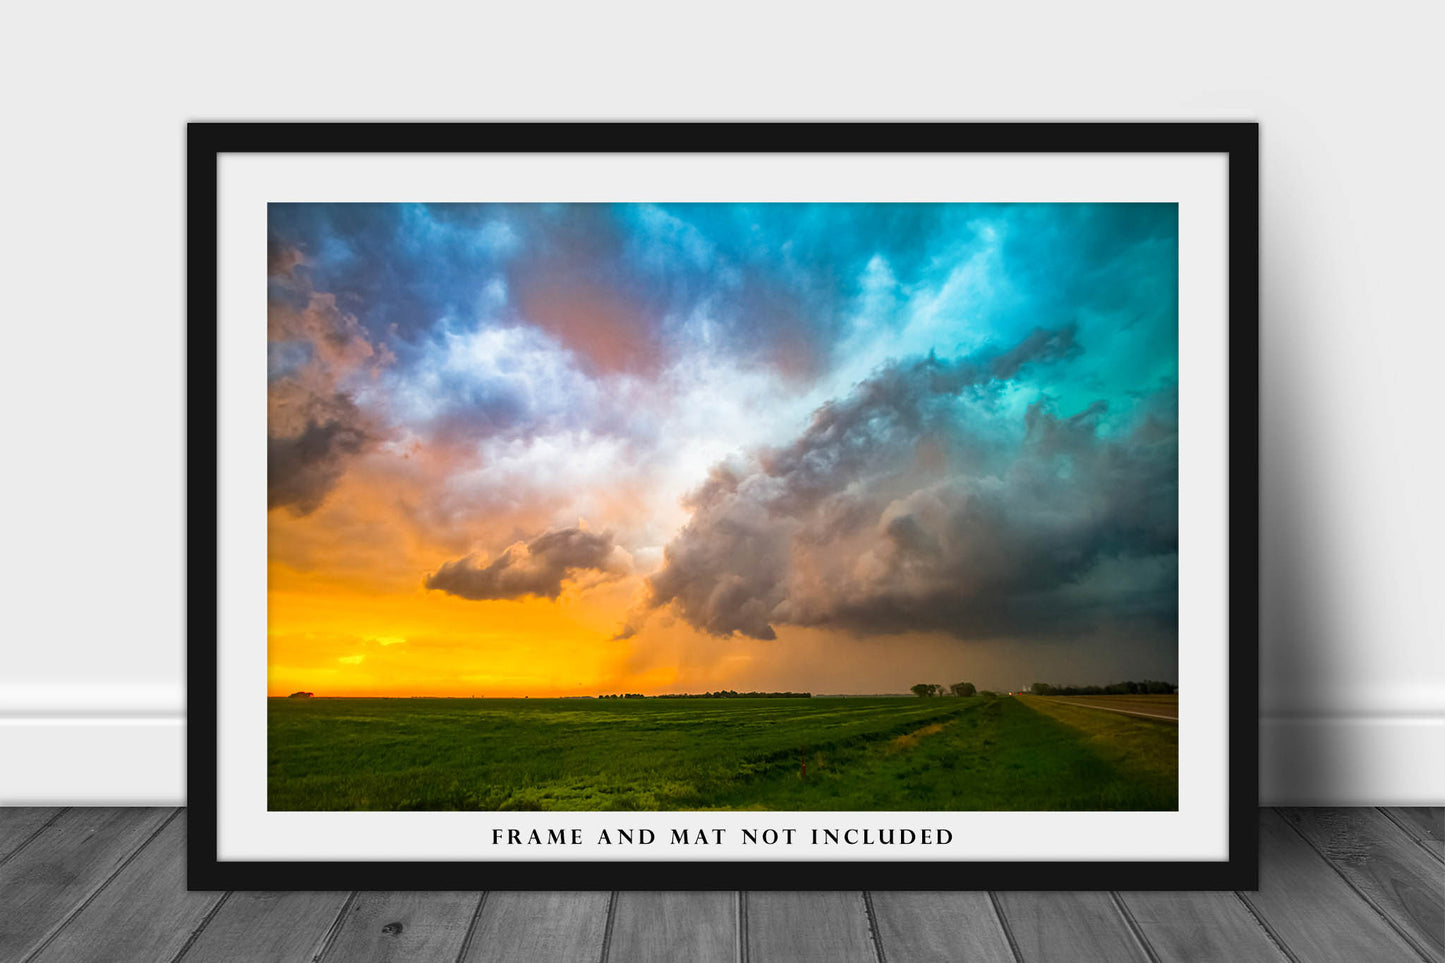 Sky Photography Print (Not Framed) Picture of Colorful Storm Clouds at Sunset on Spring Evening in Kansas Thunderstorm Wall Art Nature Decor